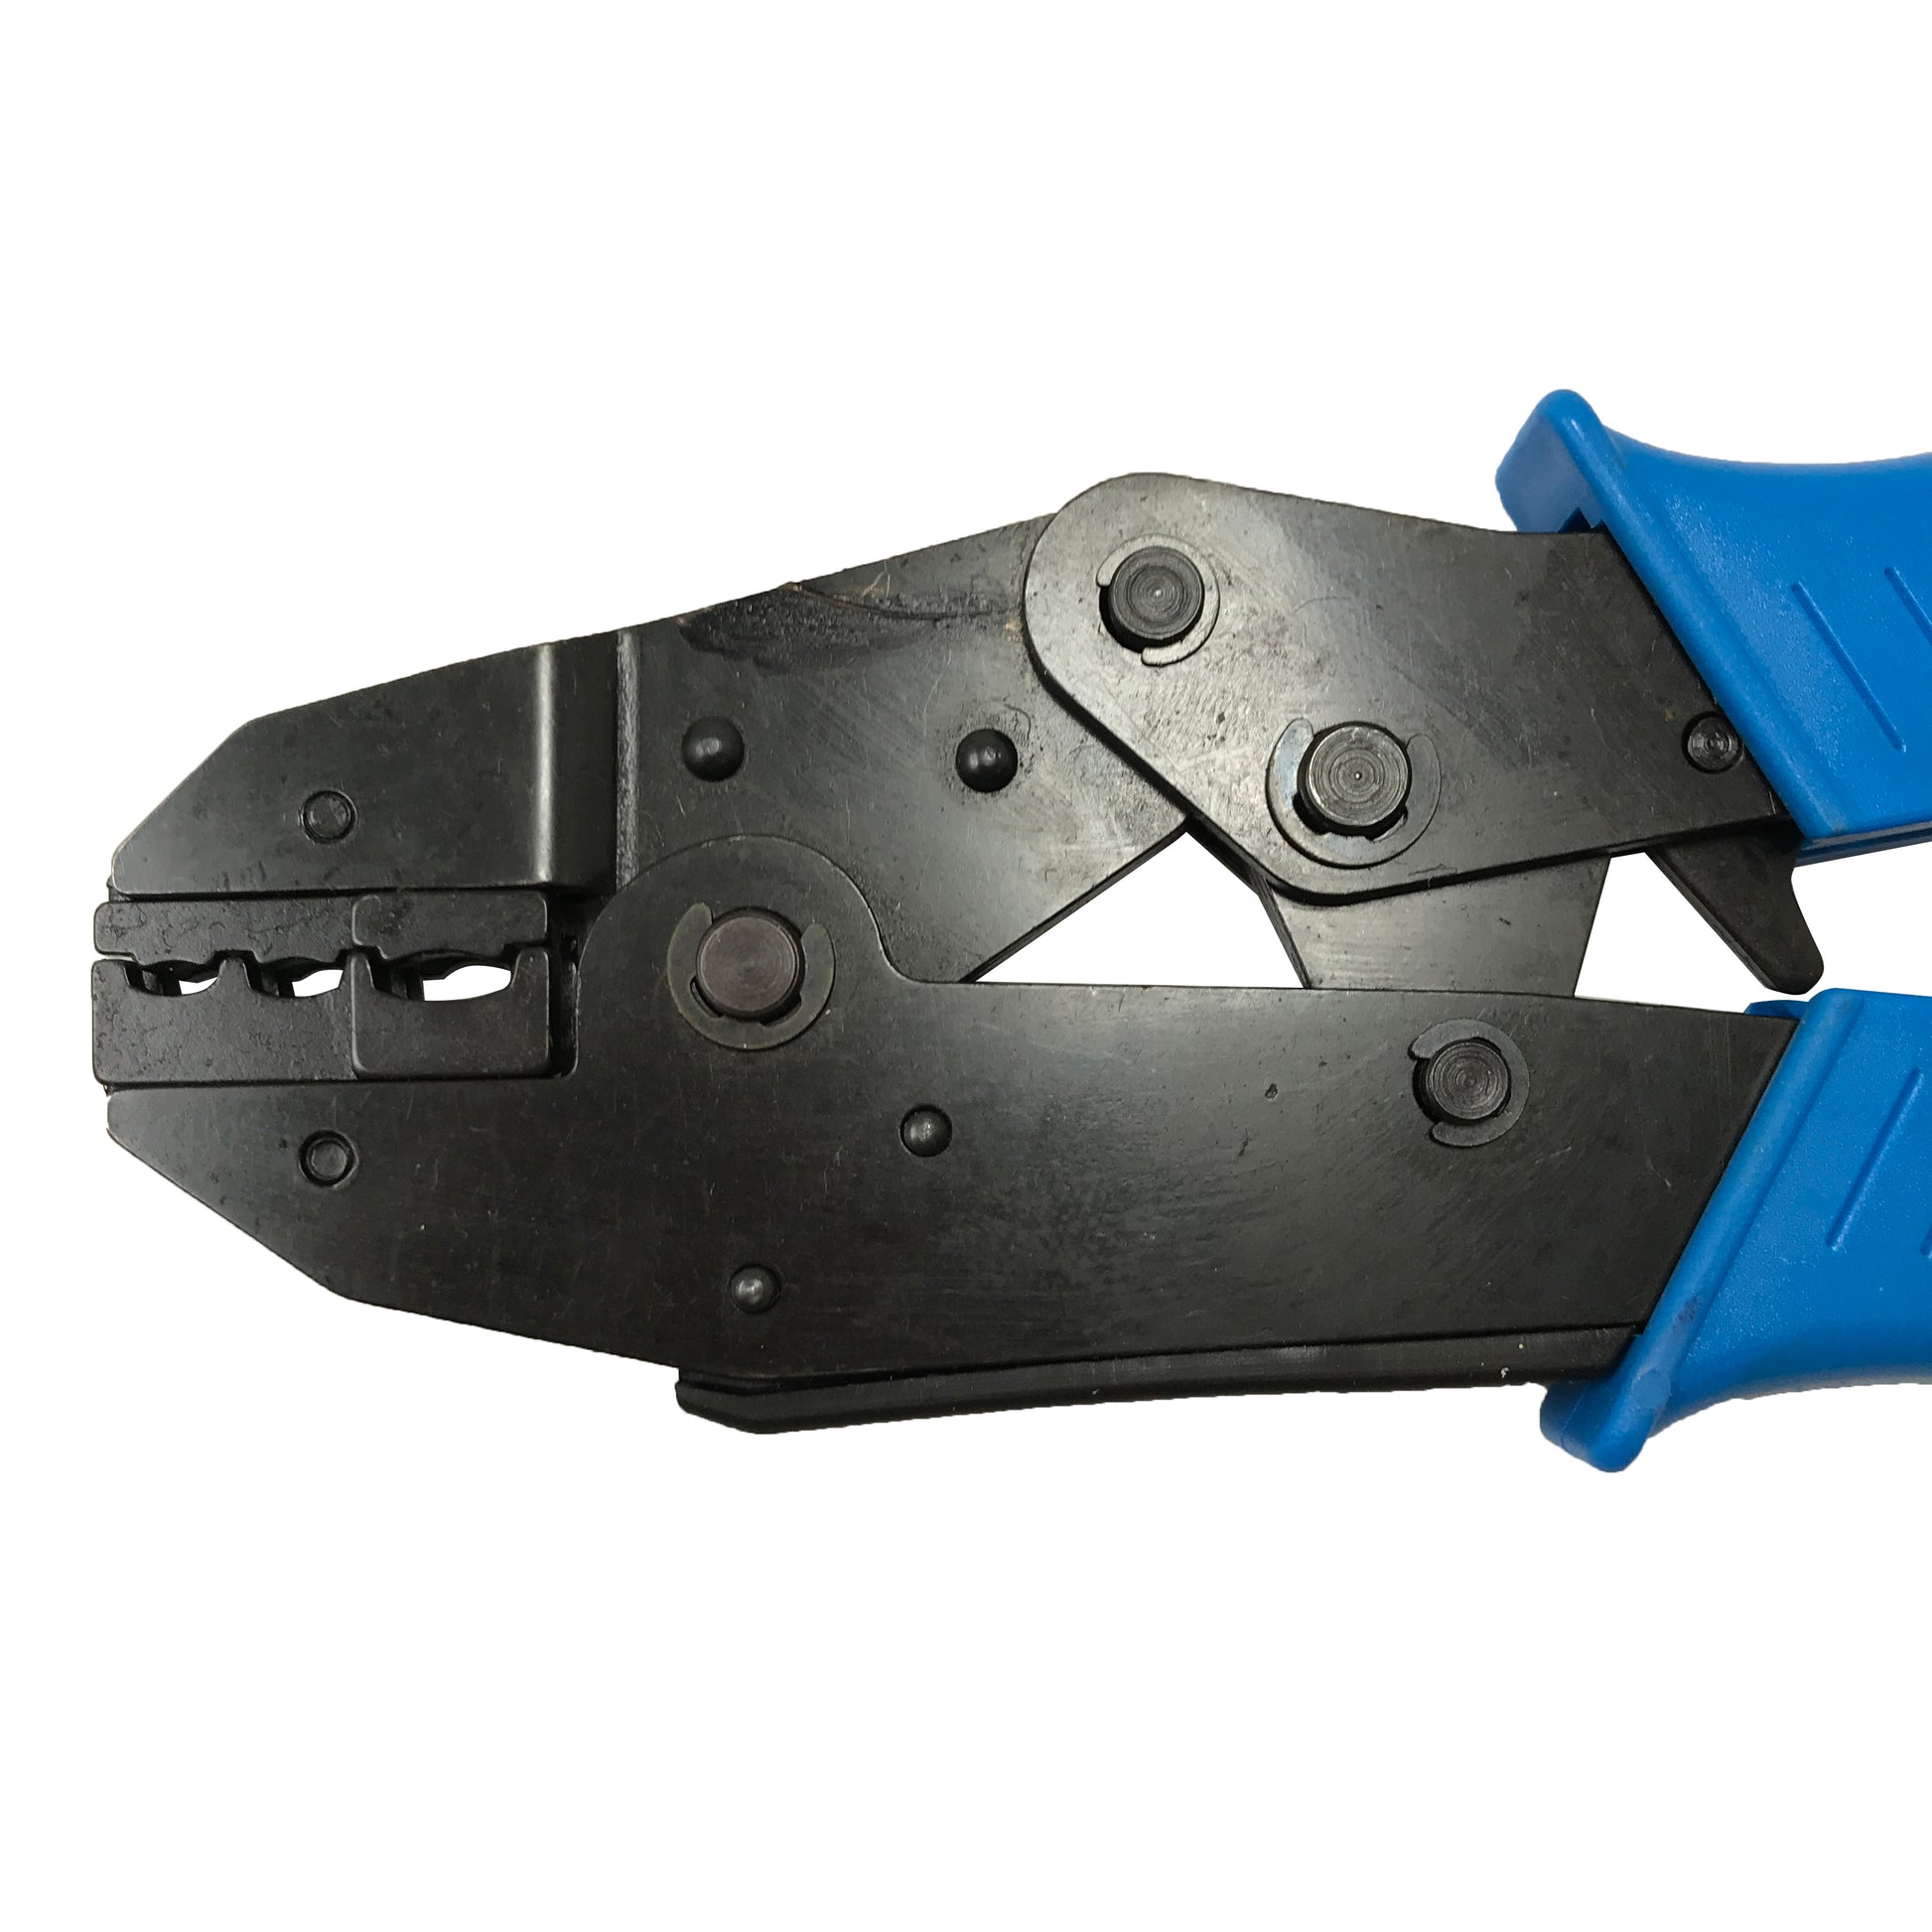 Grote Heavy Duty Ratcheting Crimper Tool for 22-10 Gauge Insulated Nylon & Vinyl PVC Terminals